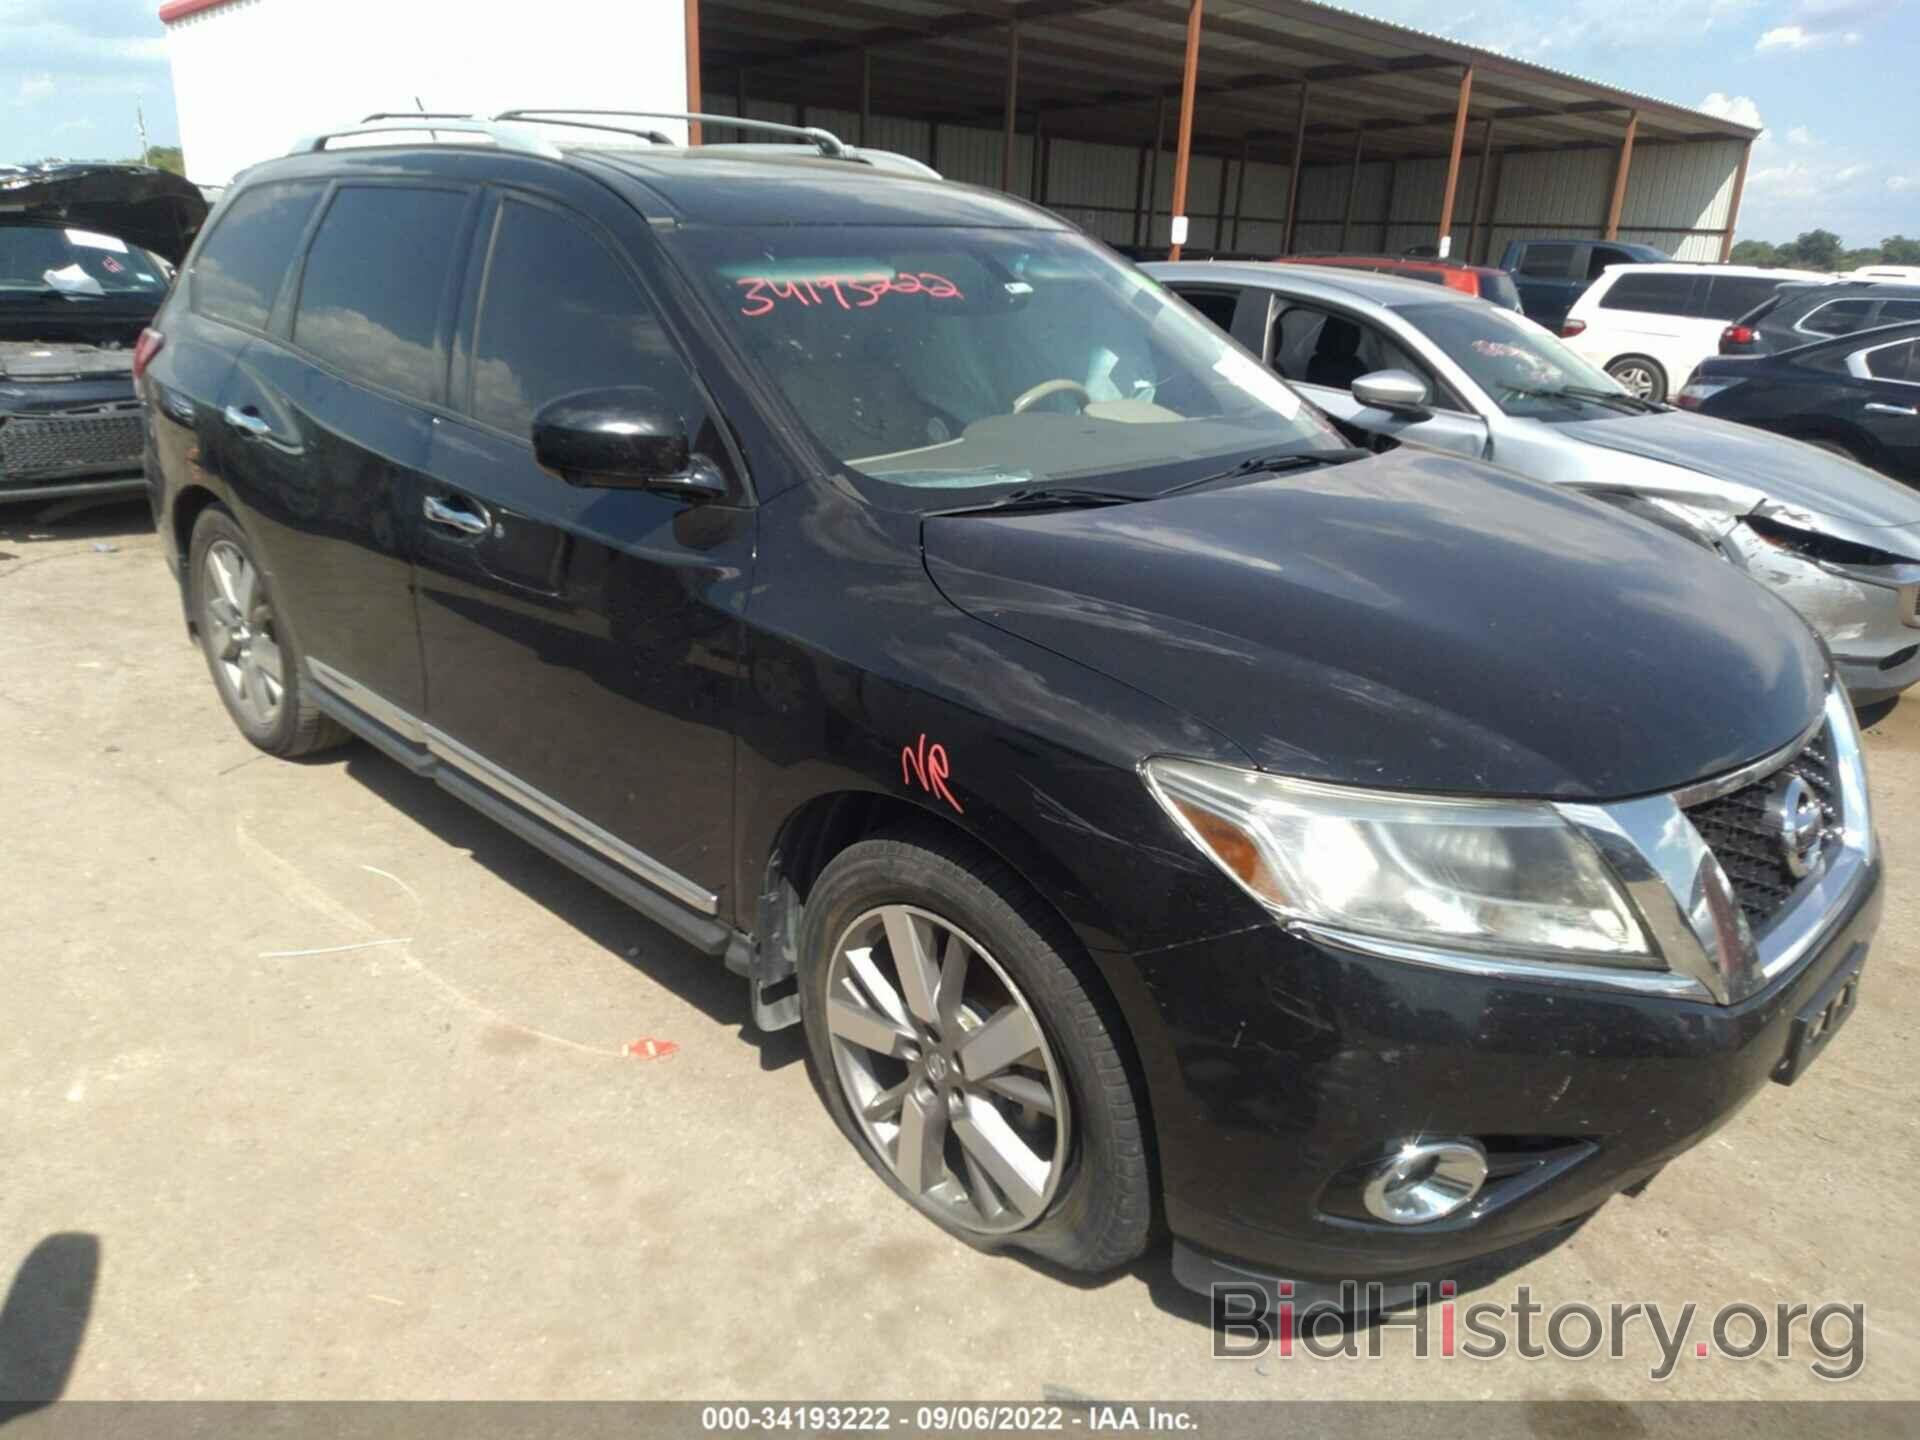 View NISSAN PATHFINDER history at insurance auctions Copart and 